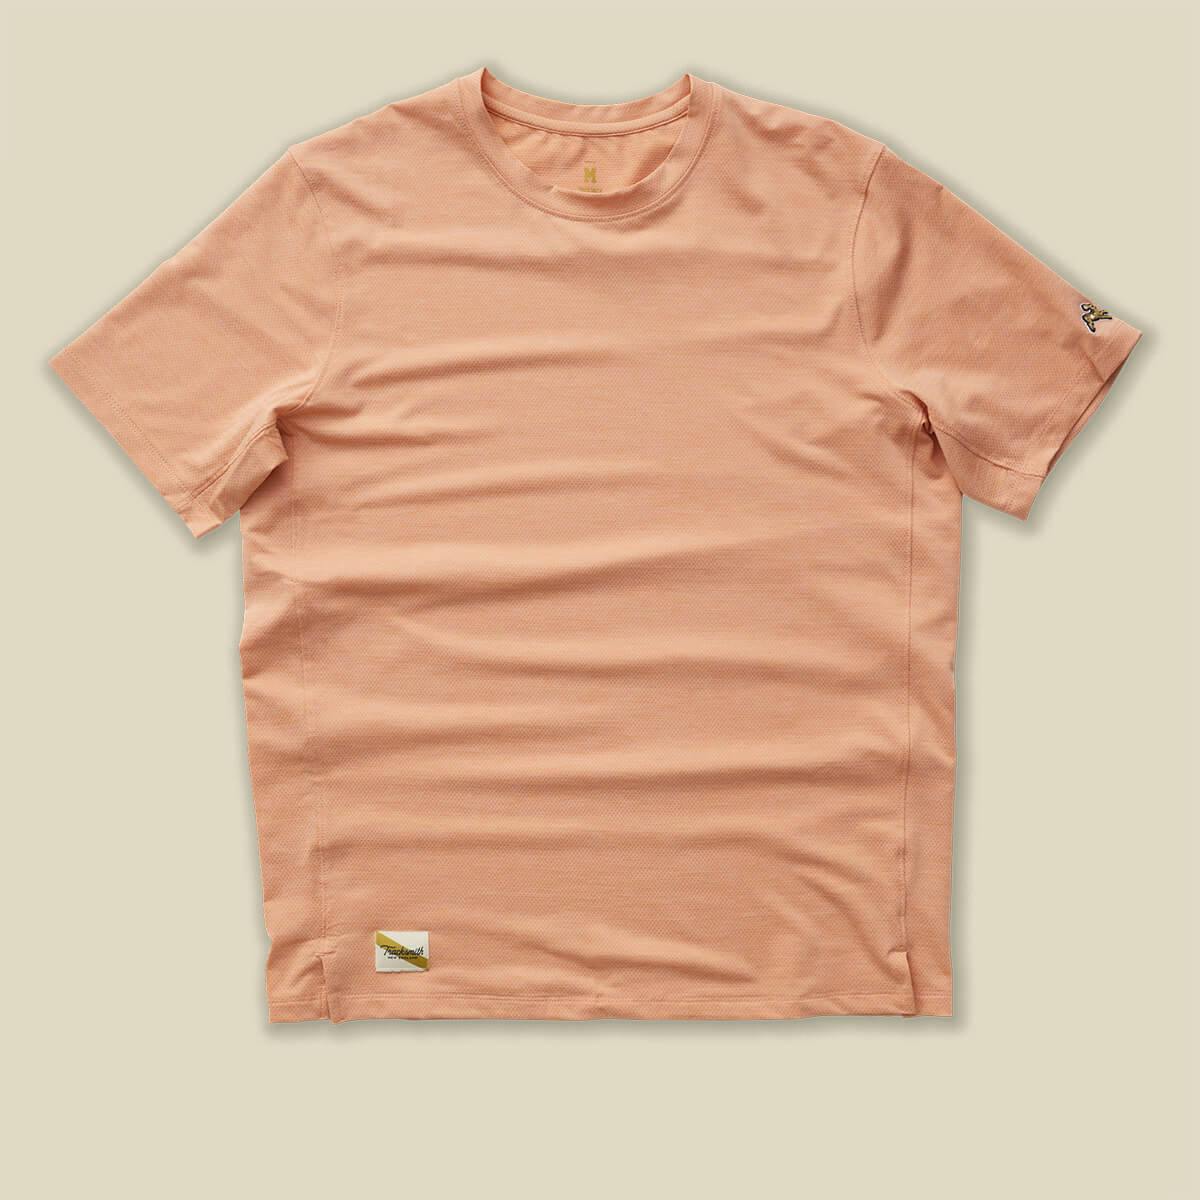 Session Tee - Muted Clay Men